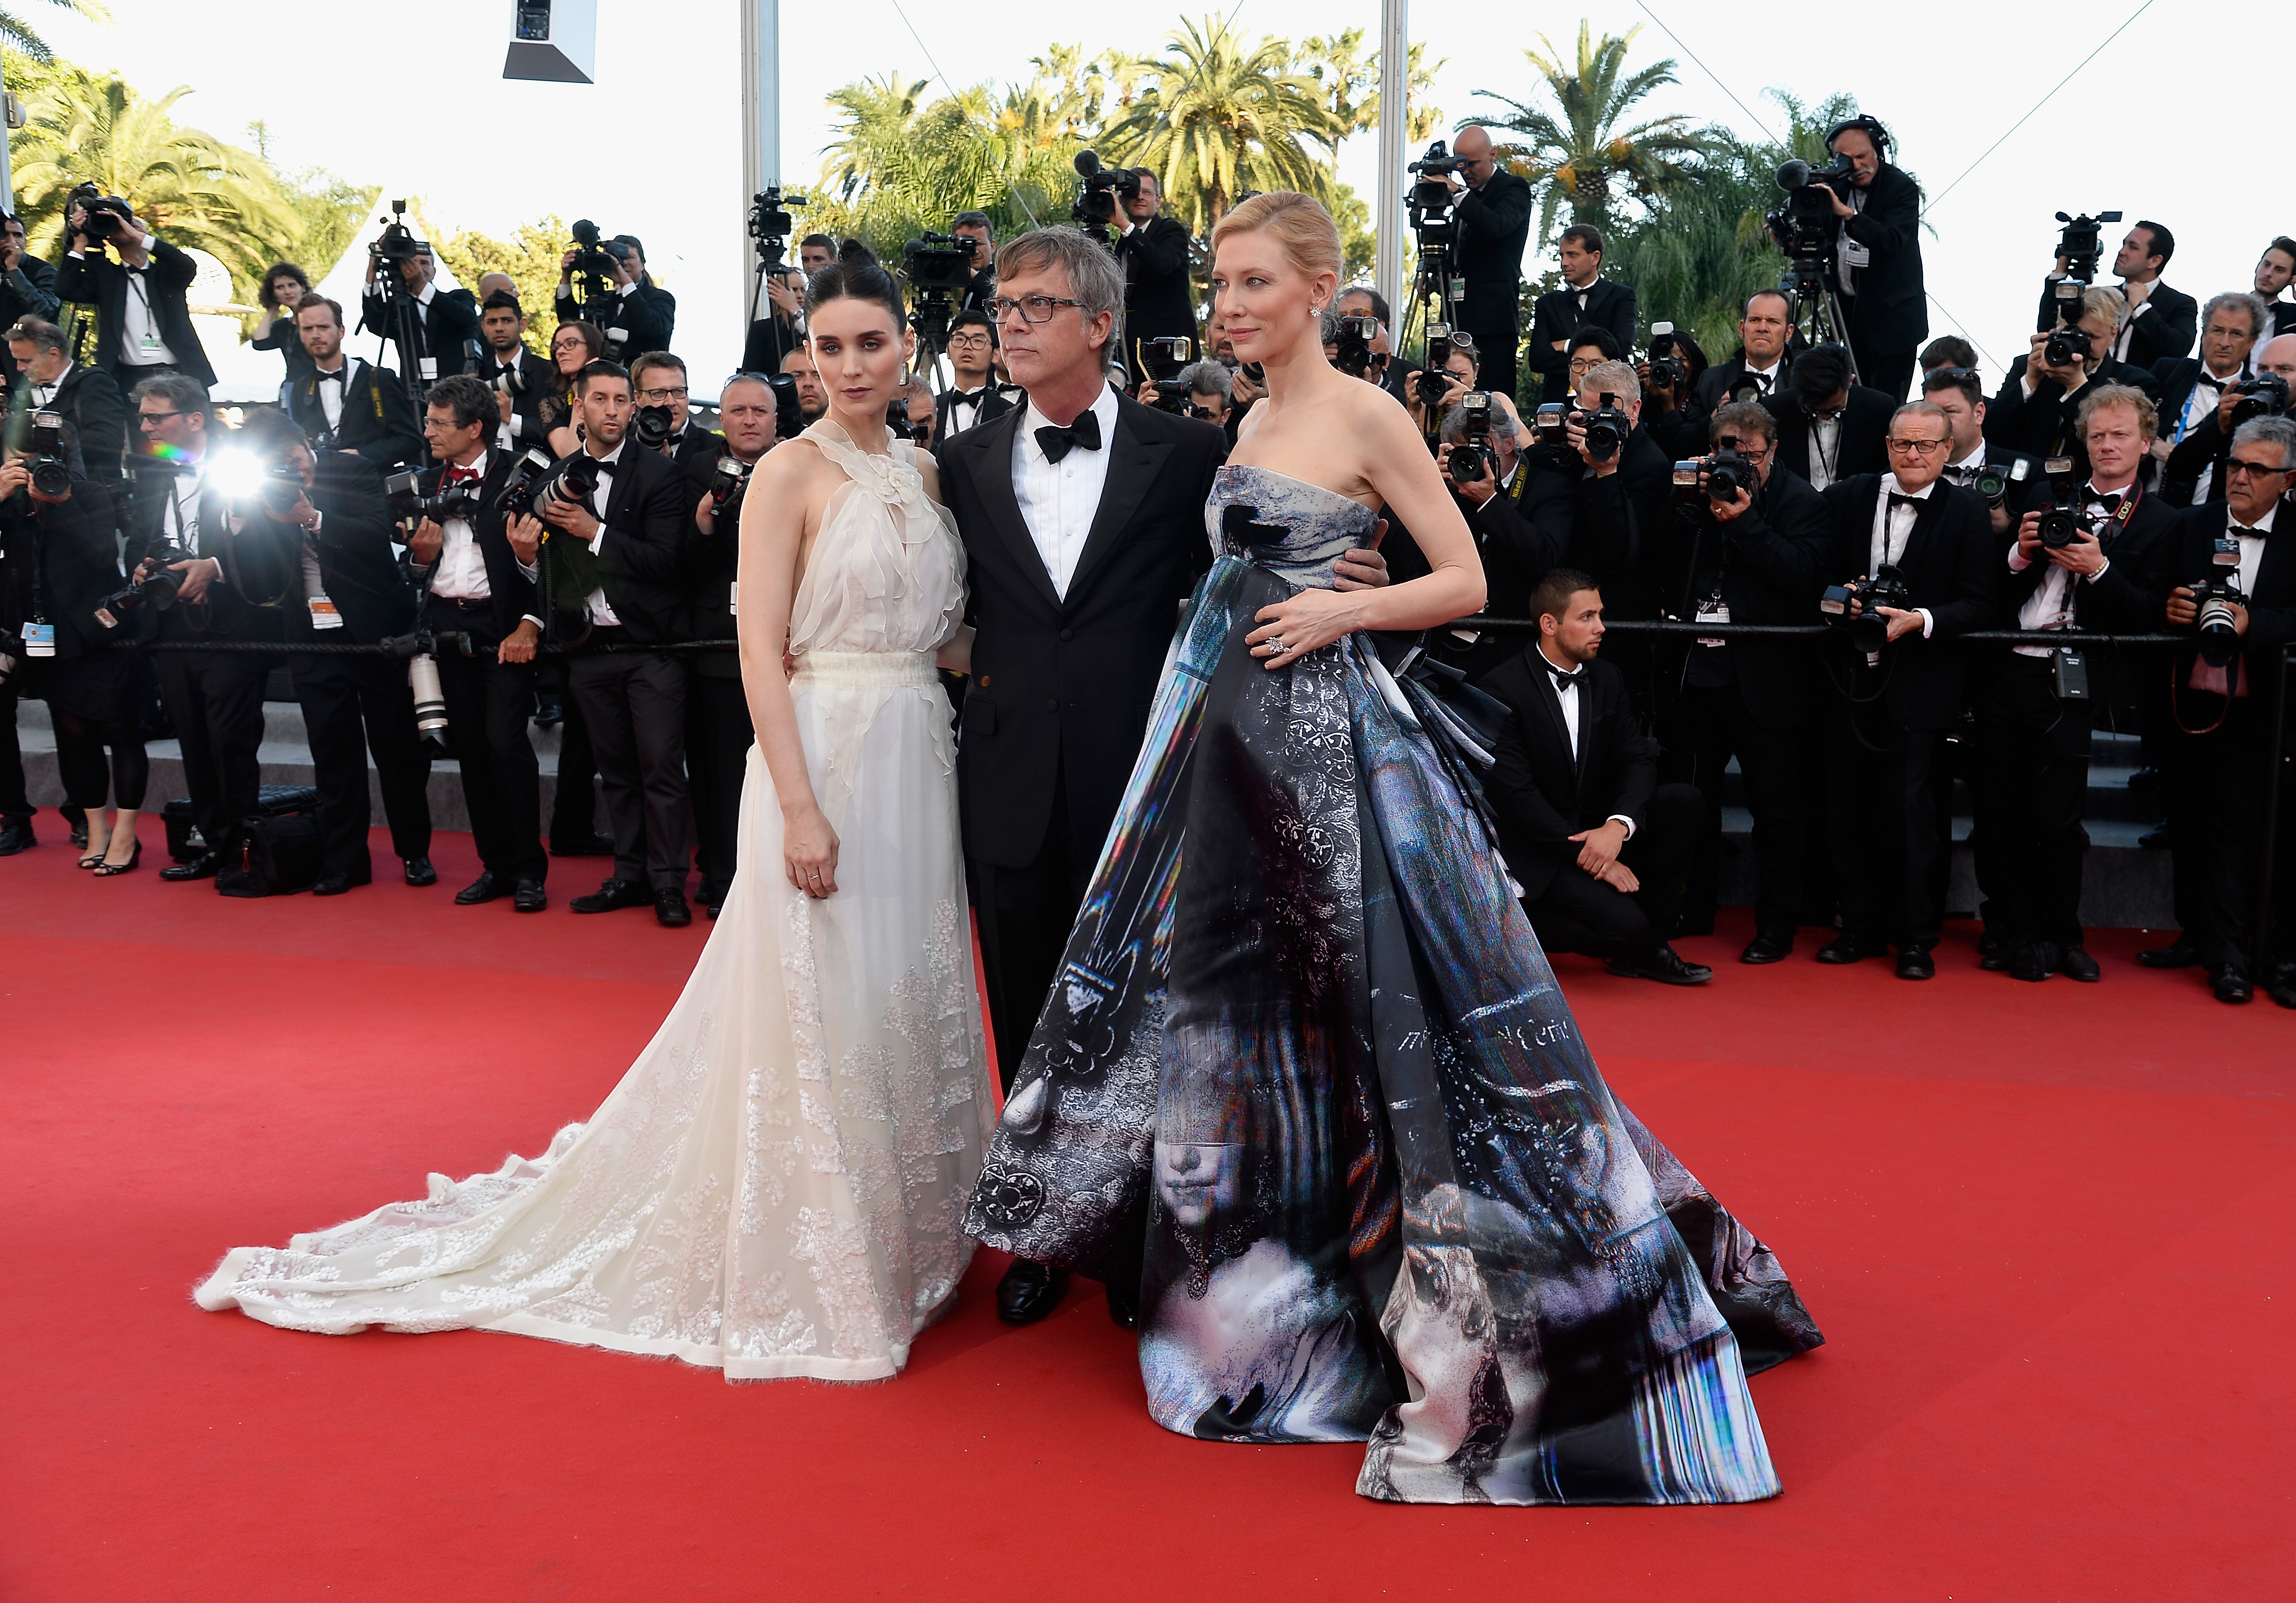 Rooney Mara, director Todd Haynes and Cate Blanchett at the Premiere of "Carol" at the Cannes Film Festival in 2015 | Source: Getty Images